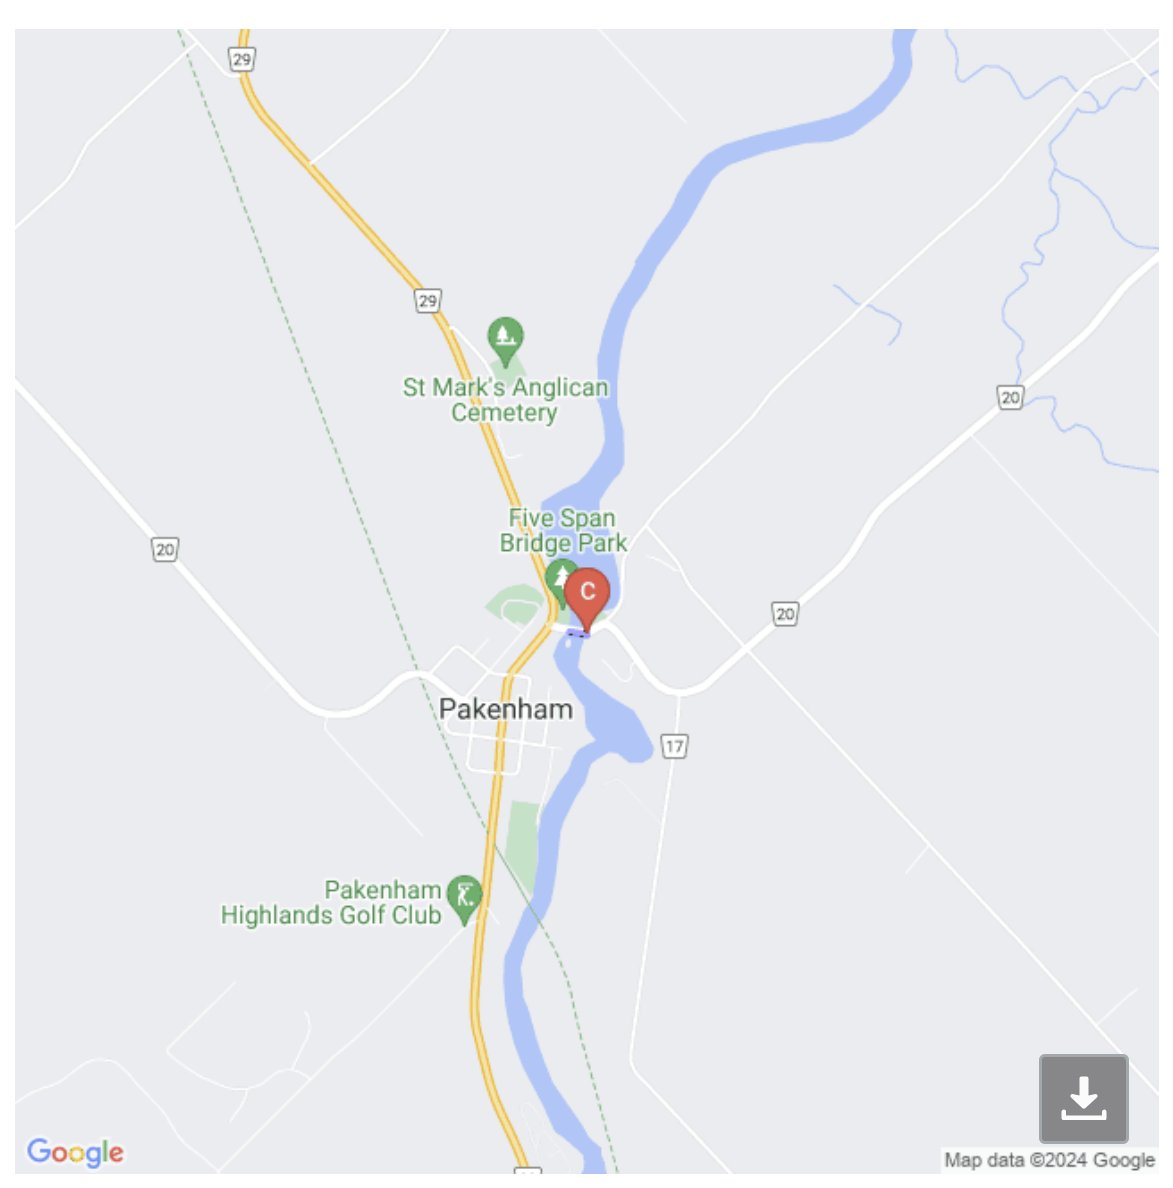 CLOSURE TOMORROW (APRIL 26): The 5-Span Bridge in Pakenham will be temporarily closed from Kinburn Sideroad from 82m west of Darks Sideroad to 62m east of County Road 29 on Friday, April 26, 11:30am-3pm. Detours will be in place.